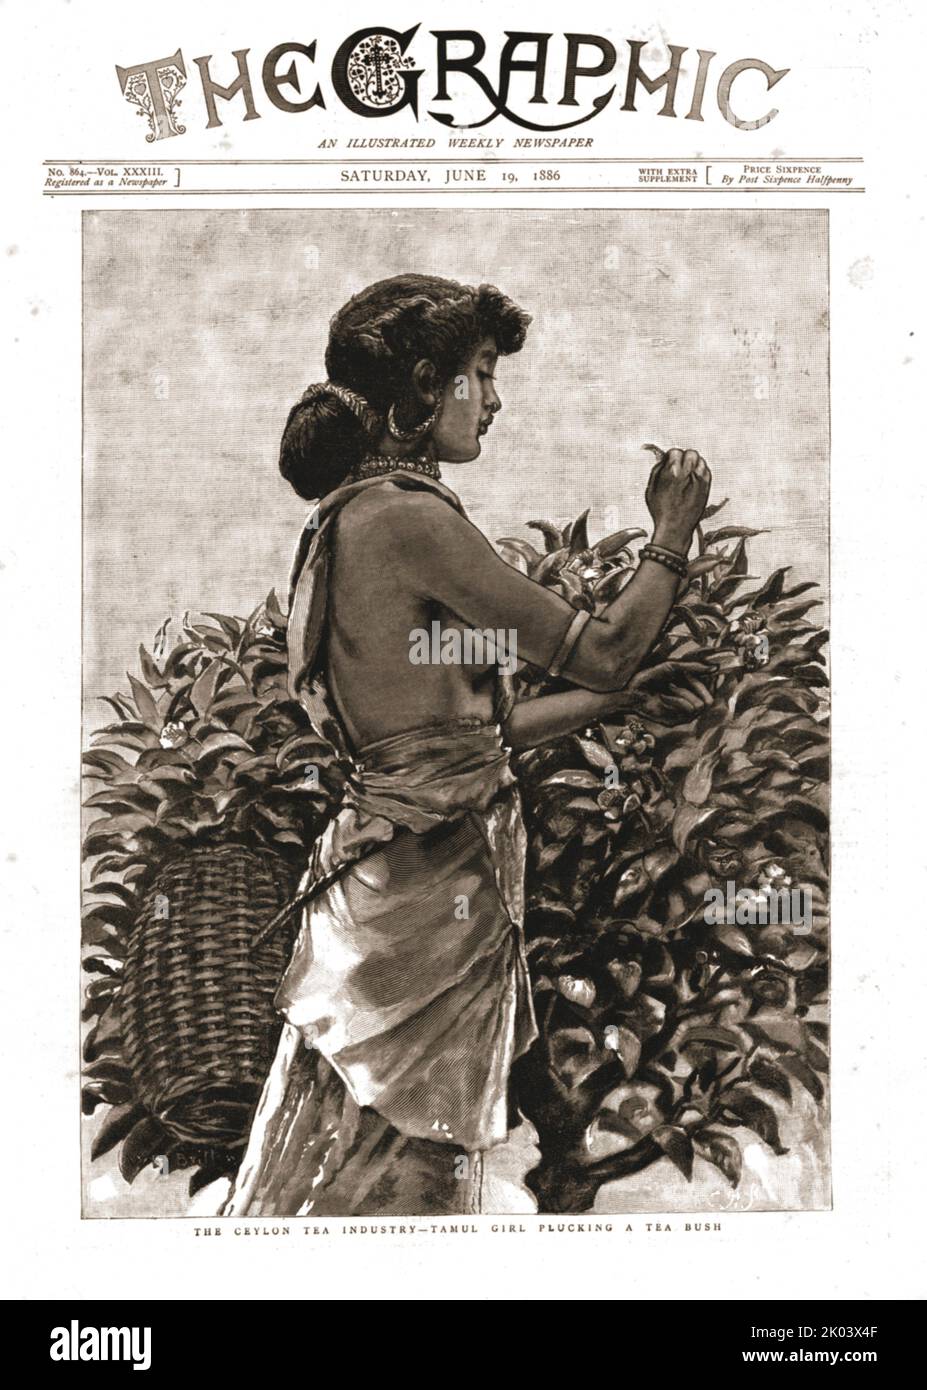 'The Graphic, Front Cover June 19th. 1886', 1886. The Ceylon tea industry - Tamul girl plucking a tea bush. From &quot;The Graphic. An Illustrated Weekly Newspaper Volume 33. January to June, 1886&quot; Stock Photo